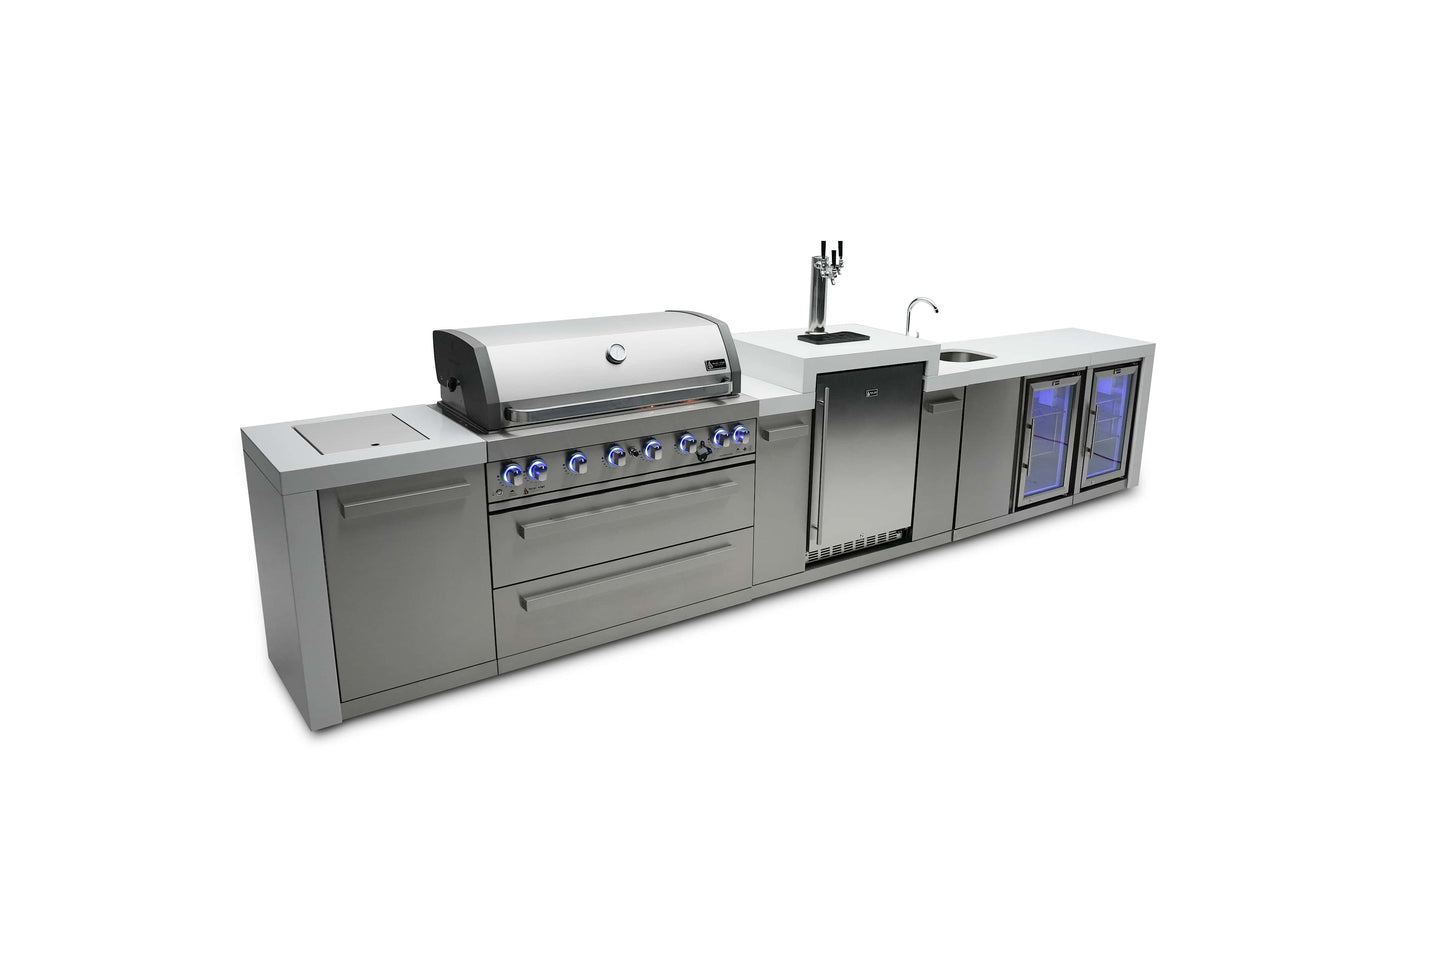 Mont Alpi Deluxe Island Grill 805 - side view